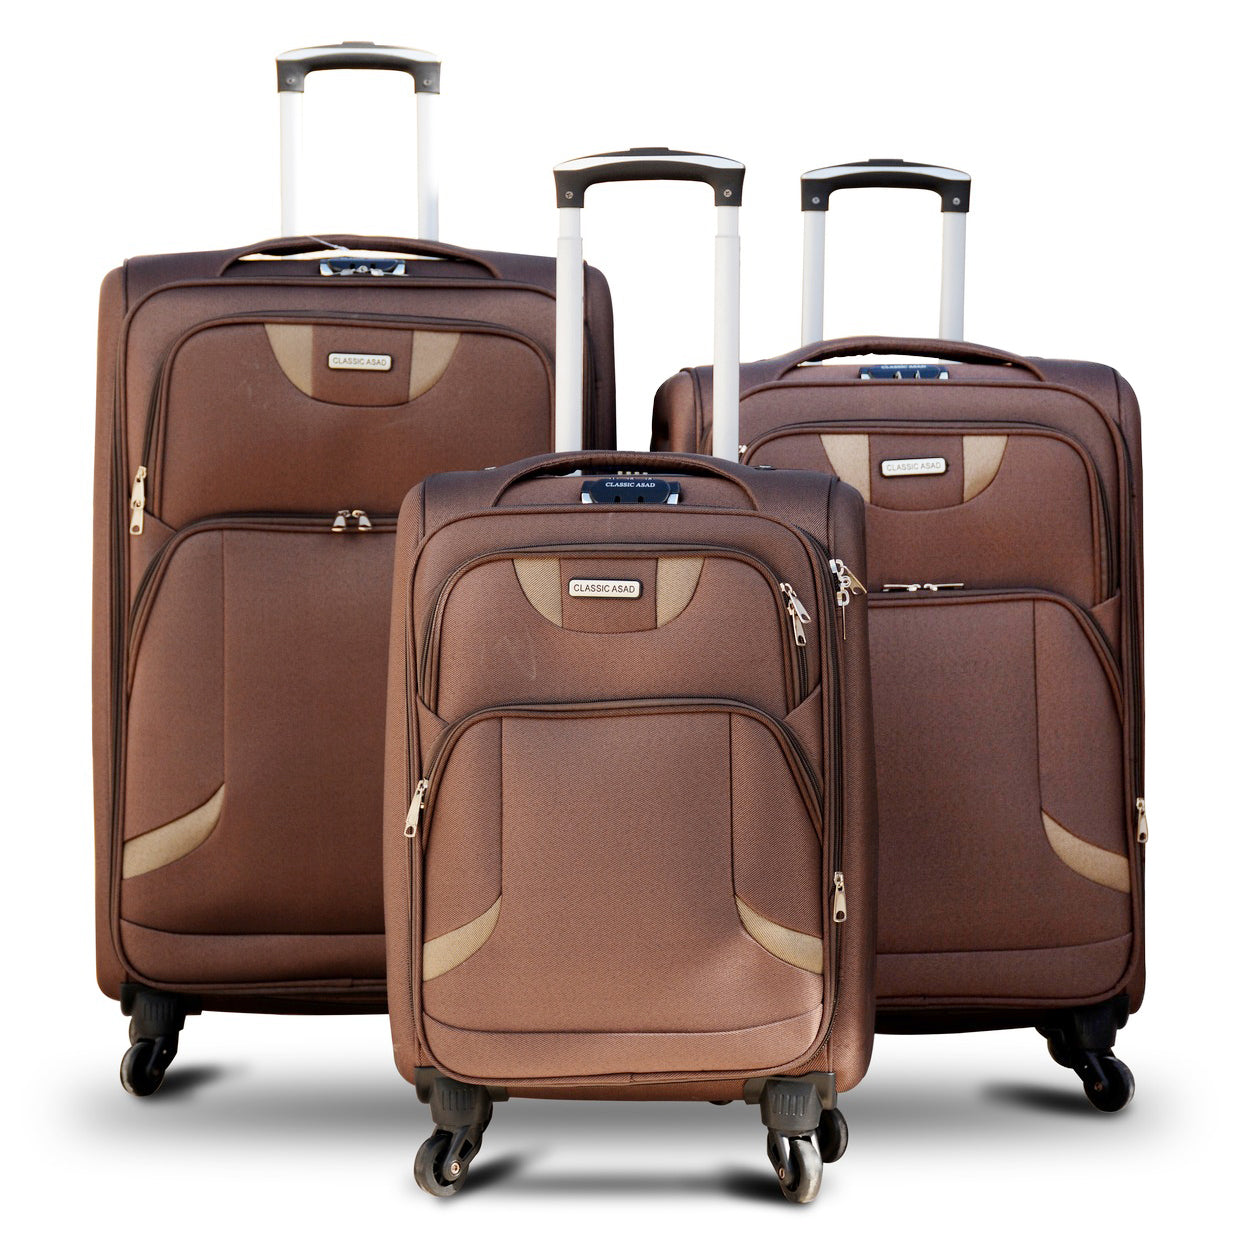 New ACE Best Coffee 4 Wheels Soft Material Lightweight Luggage | 4 Pcs Set 20” 24” 28"32 Inches